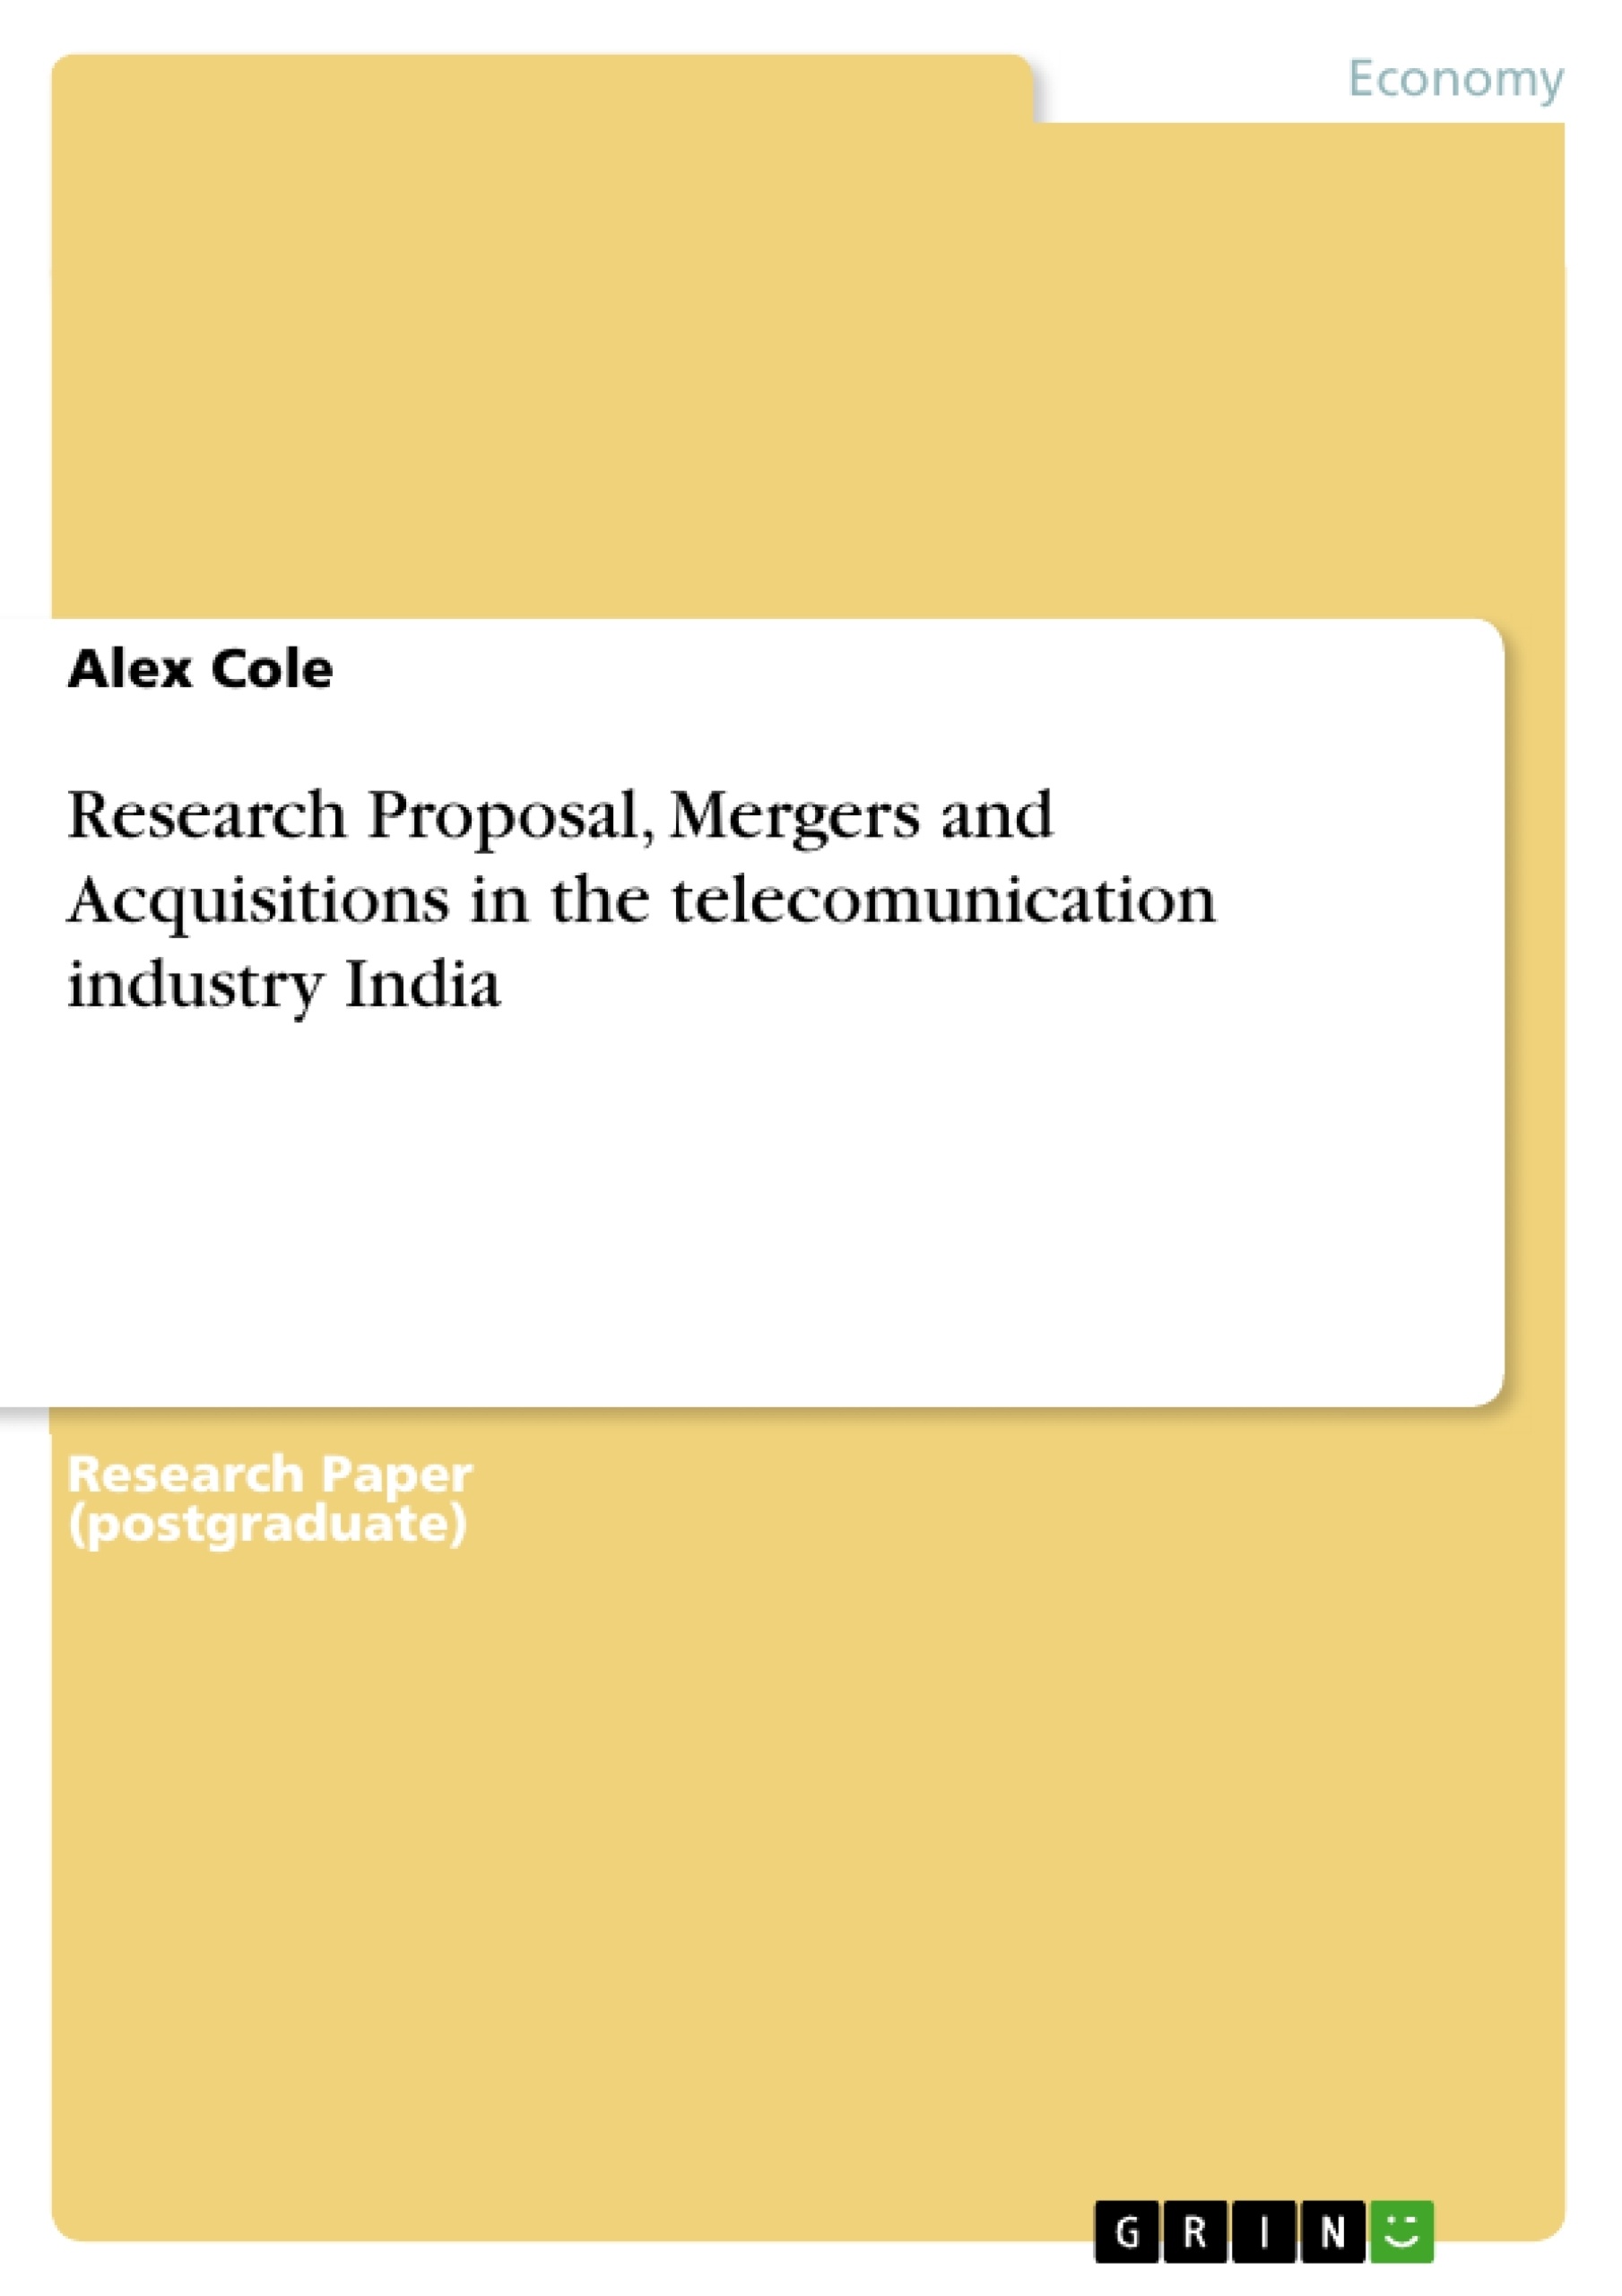 Title: Research Proposal, Mergers and Acquisitions in the telecomunication industry India